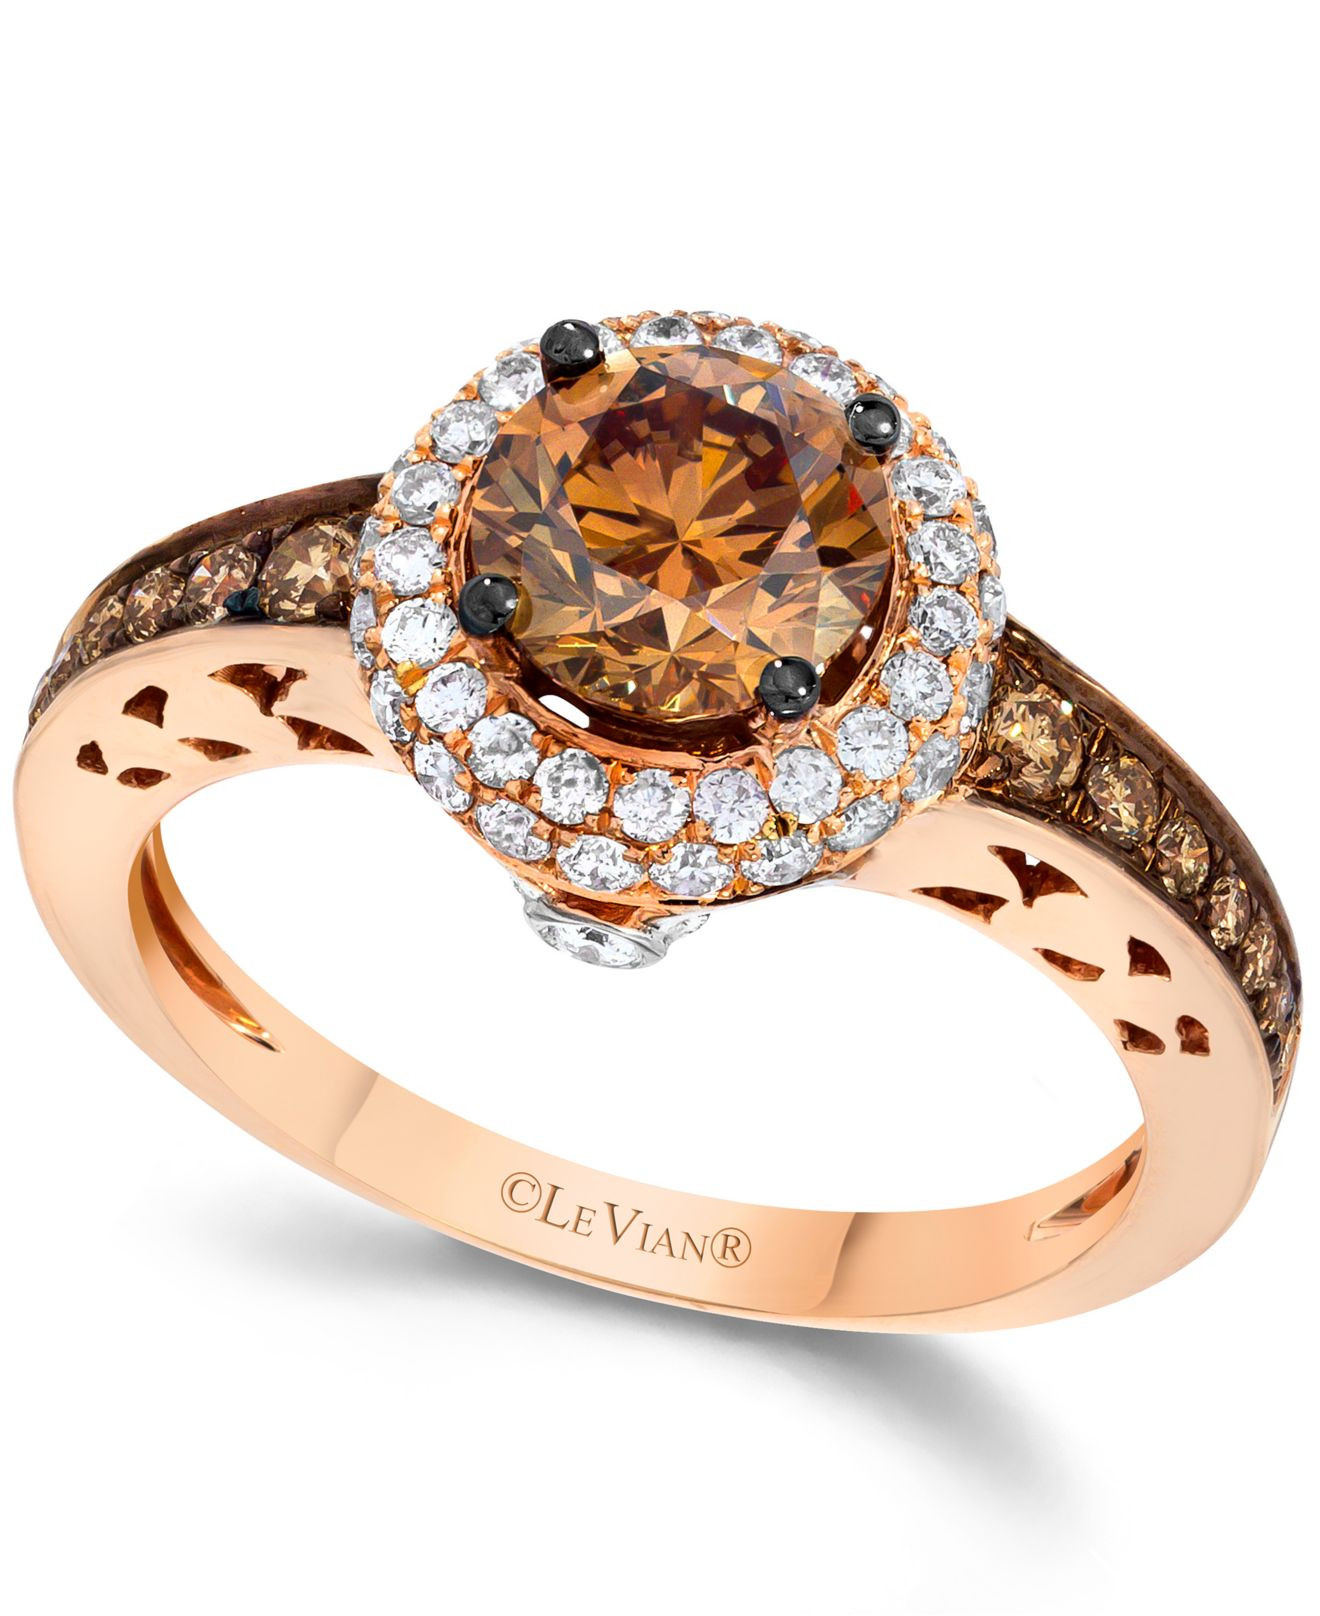 Rose Gold Engagement Rings With Chocolate Diamonds
 Le vian Chocolate And White Diamond Engagement Ring In 14k